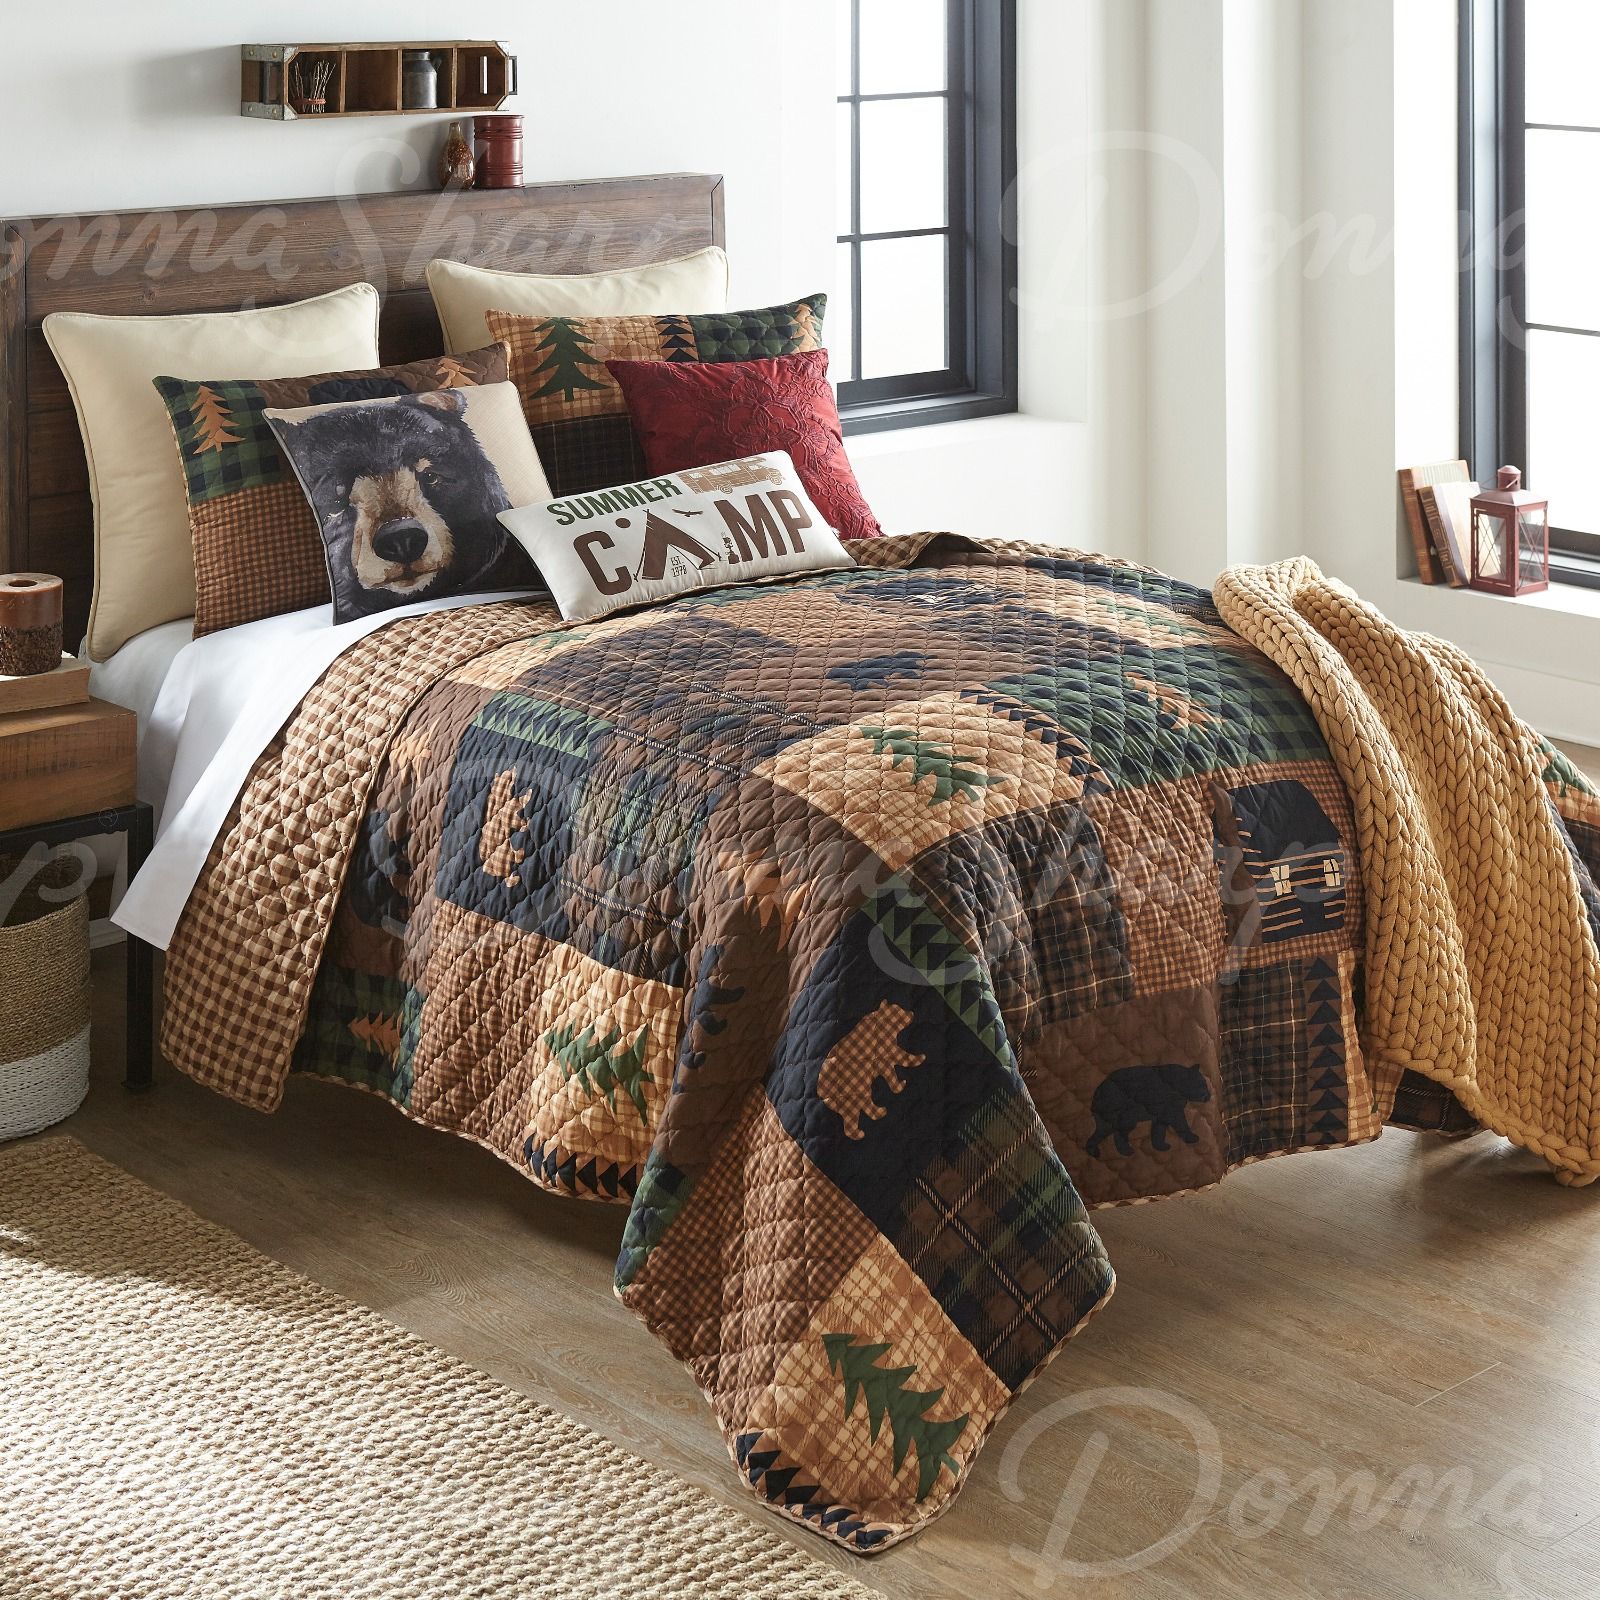 3 Piece Bear Dance Lodge Quilt Set with F Details about   Donna Sharp Full/Queen Bedding Set 